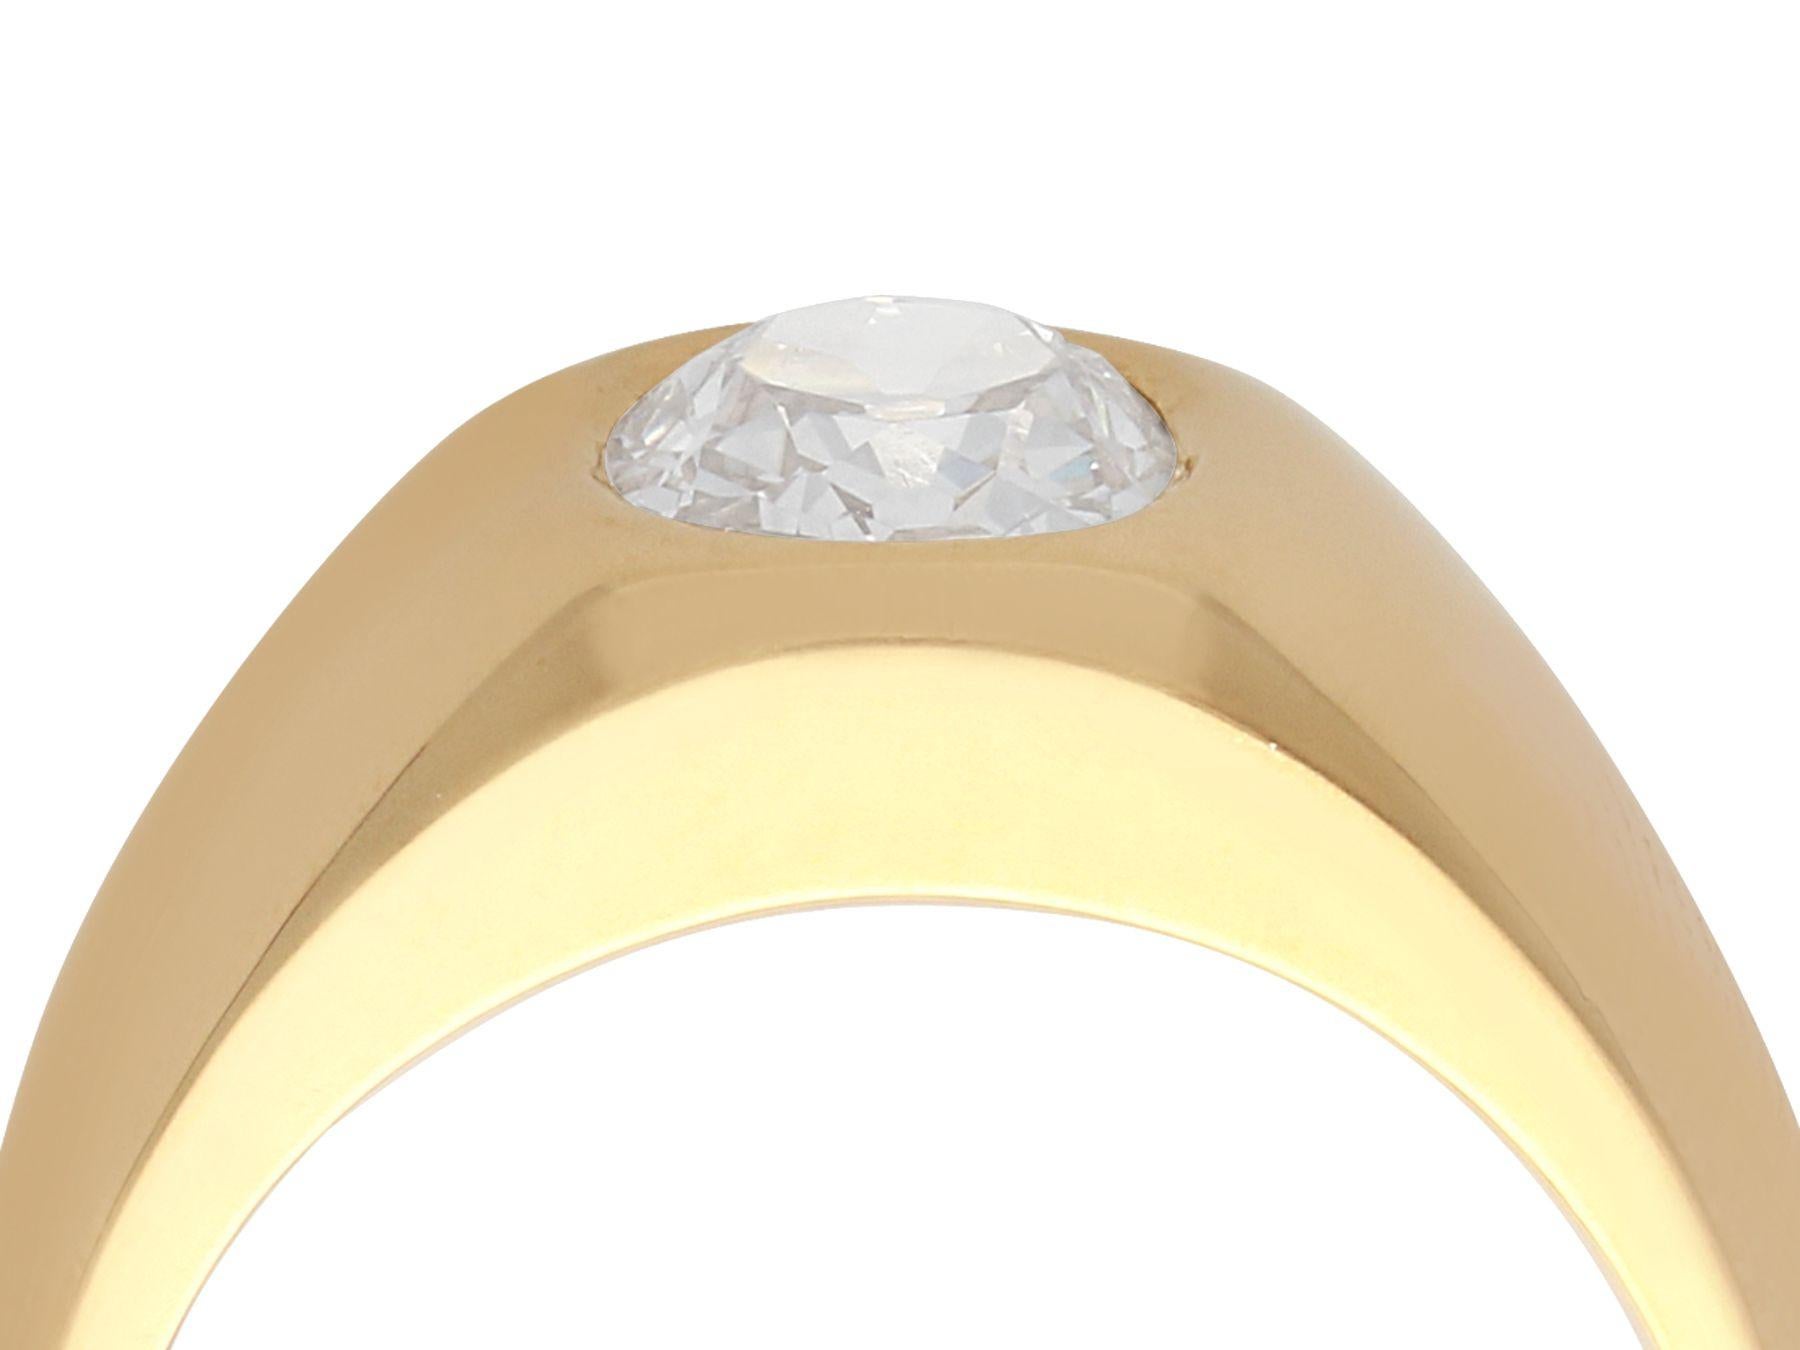 A stunning, fine and impressive vintage French 1.04 carat diamond and 18k yellow gold gent's solitaire ring; part of our diverse contemporary jewelry collections.

This stunning, fine and impressive French gent's solitaire ring has been crafted in